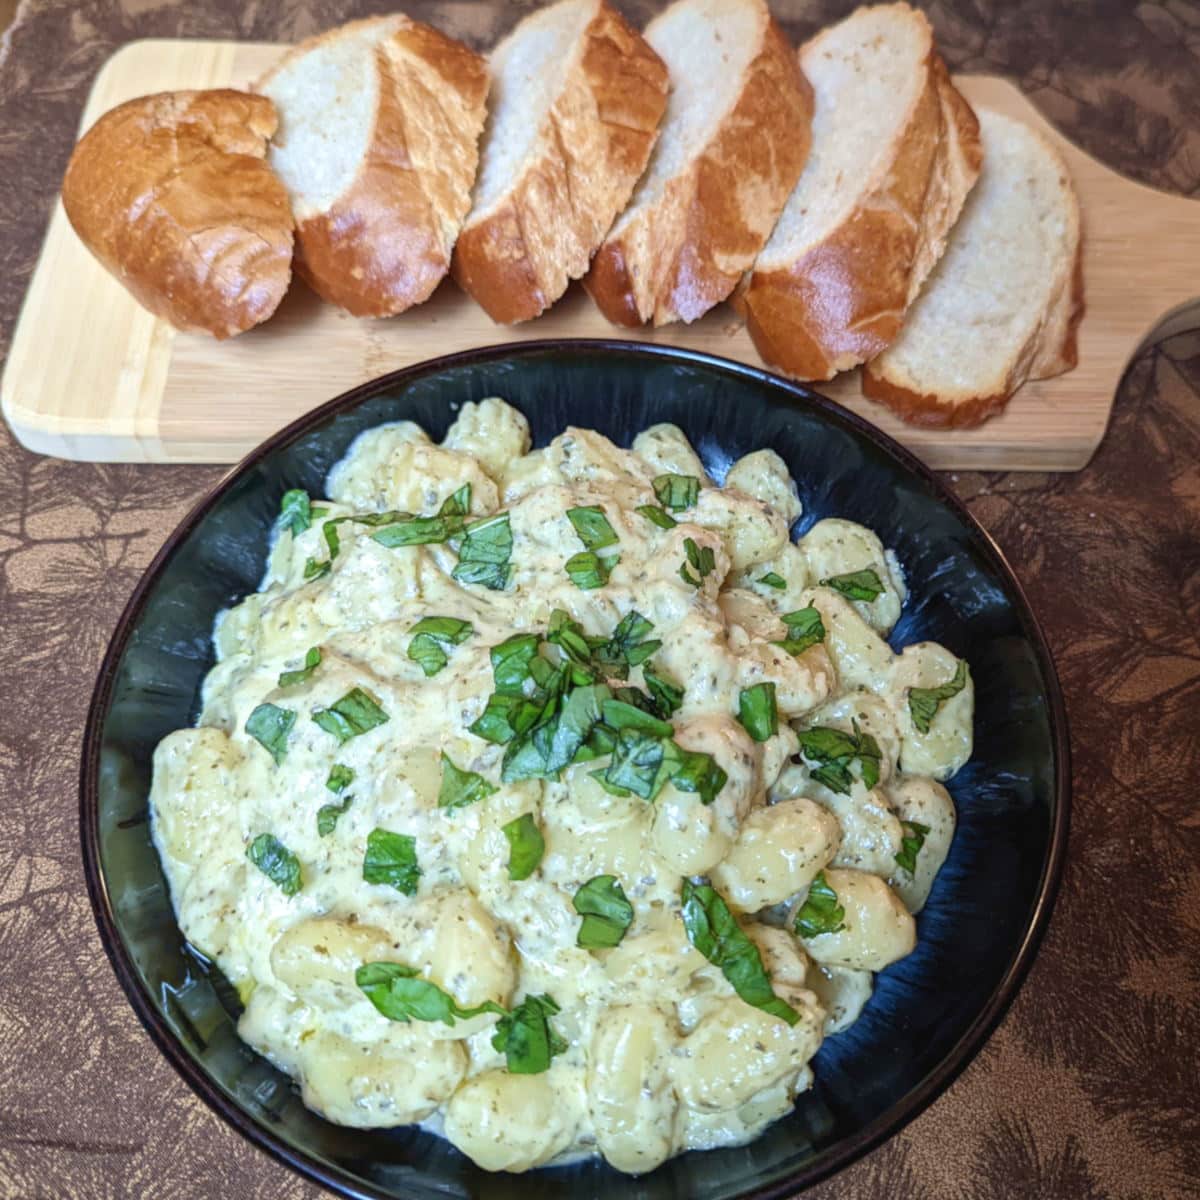 gnocchi coated in a creamy pesto sauce, served alongside some sliced French bread.